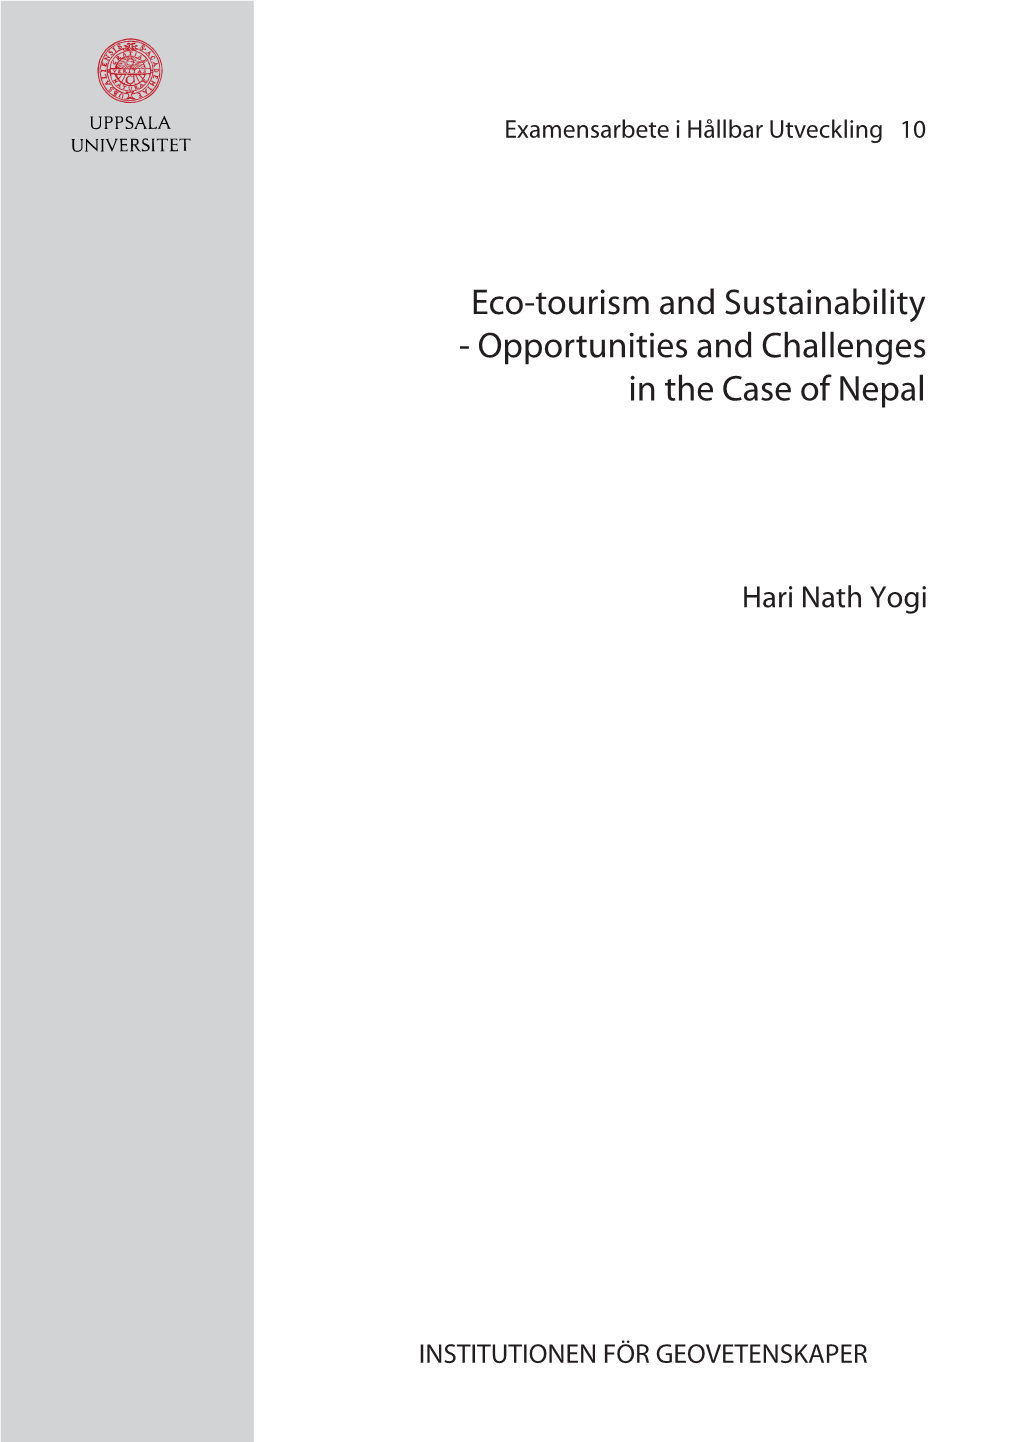 Eco-Tourism and Sustainability - Opportunities and Challenges in the Case of Nepal